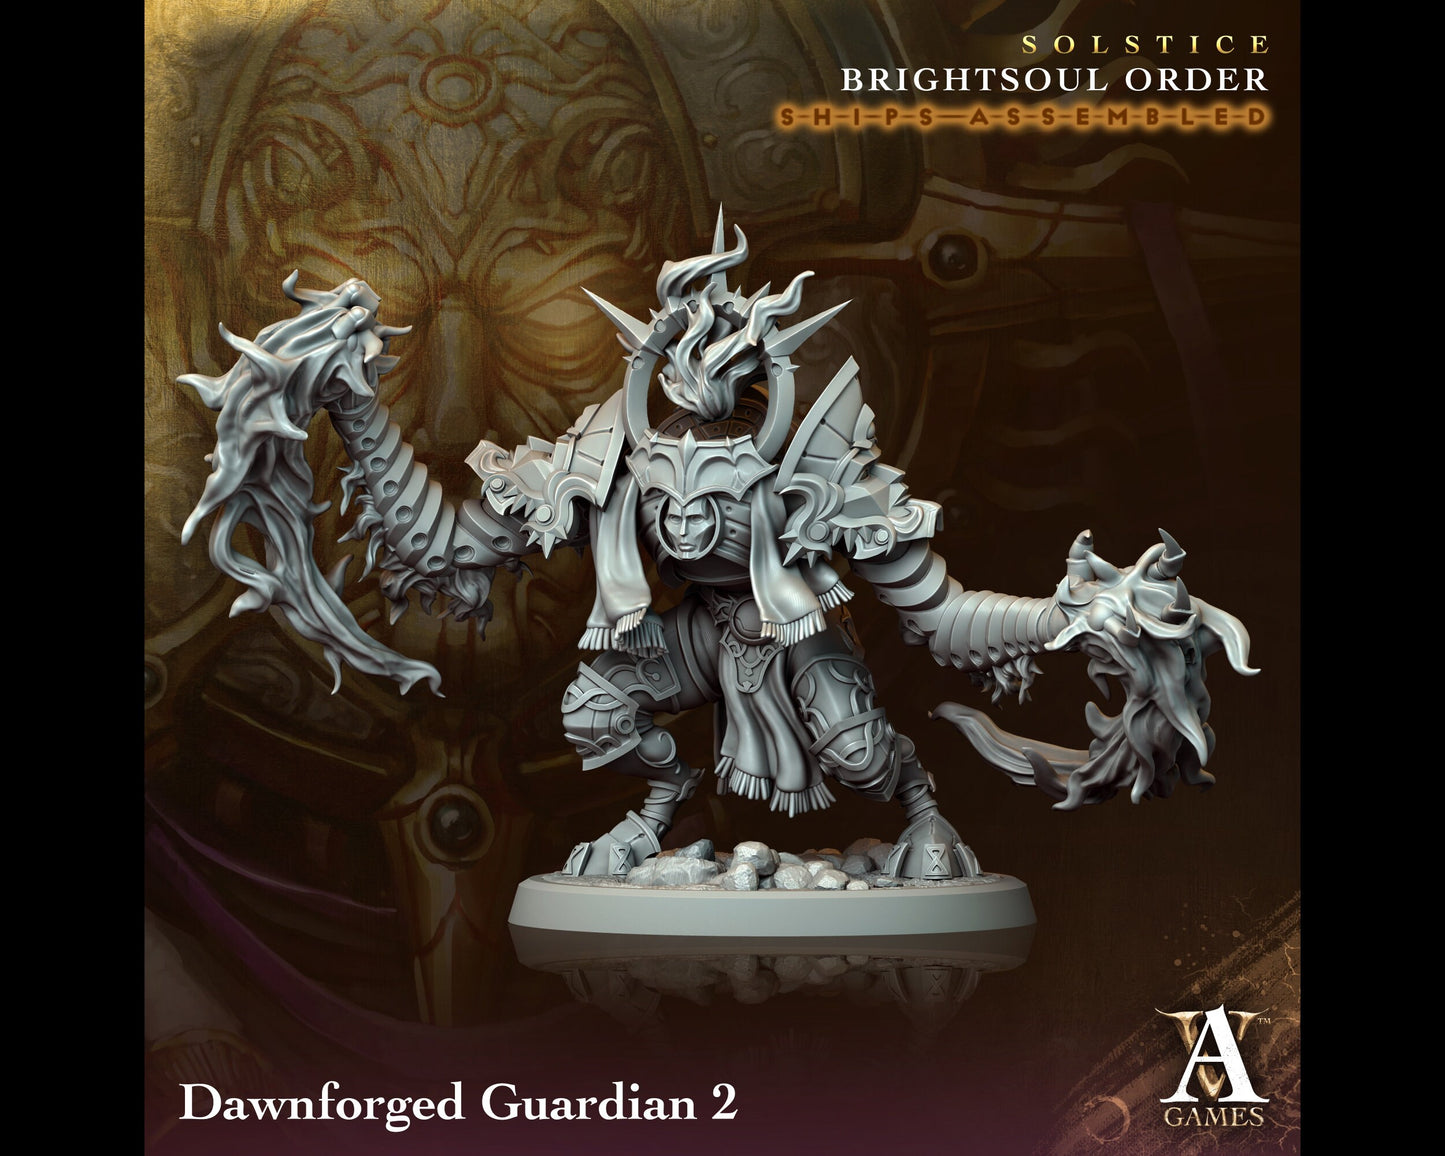 Dawnforged Guardian 2 - Brightsoul Order - Highly Detailed Resin 8k 3D Printed Miniature